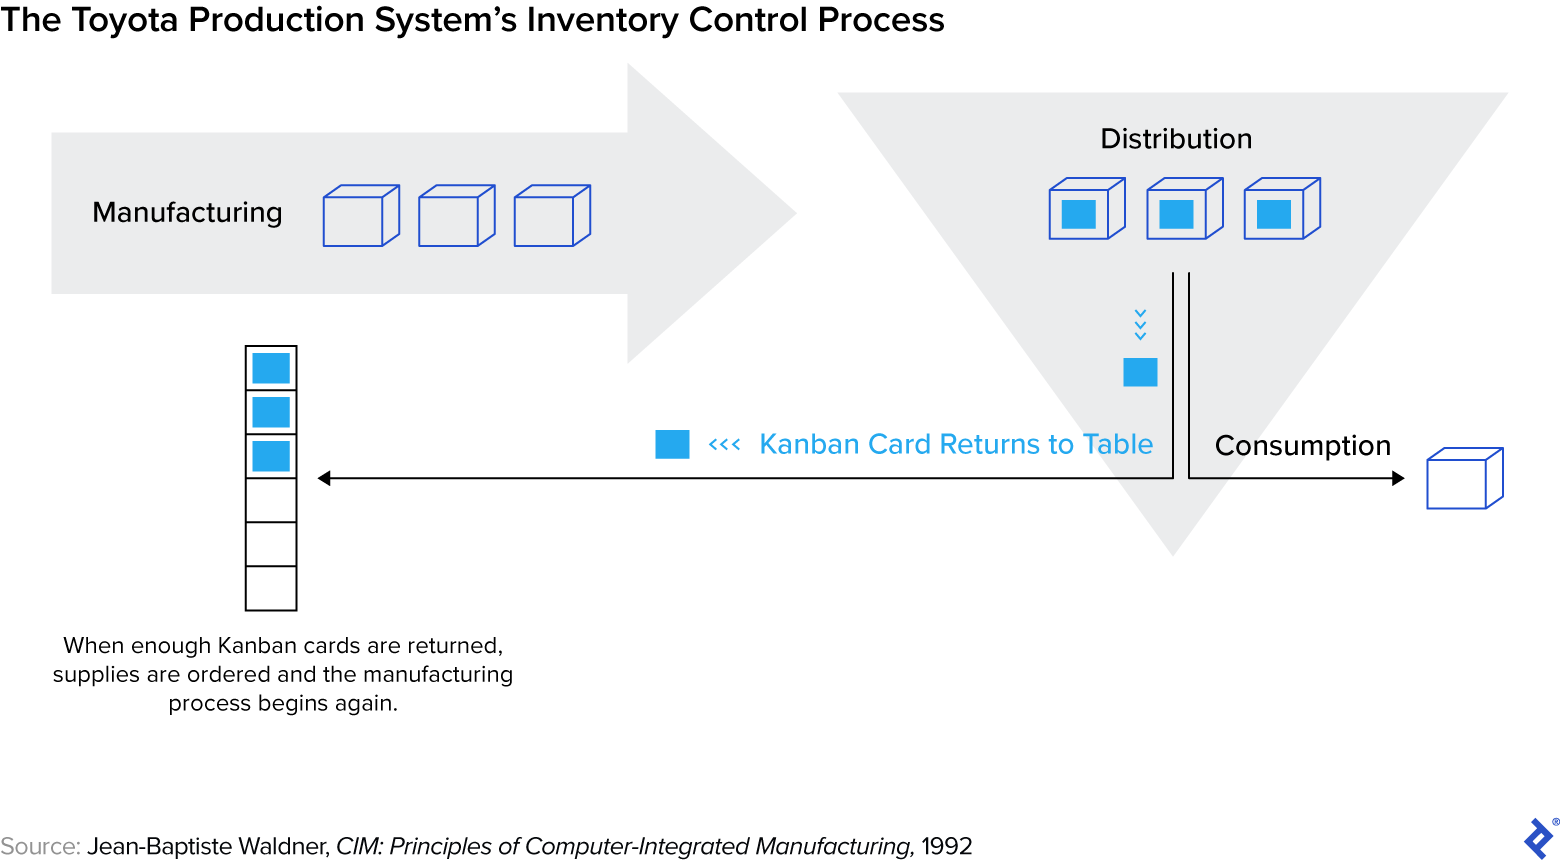 Toyota Production System’s inventory control process uses physical Kanban cards to track tasks from start to finish.